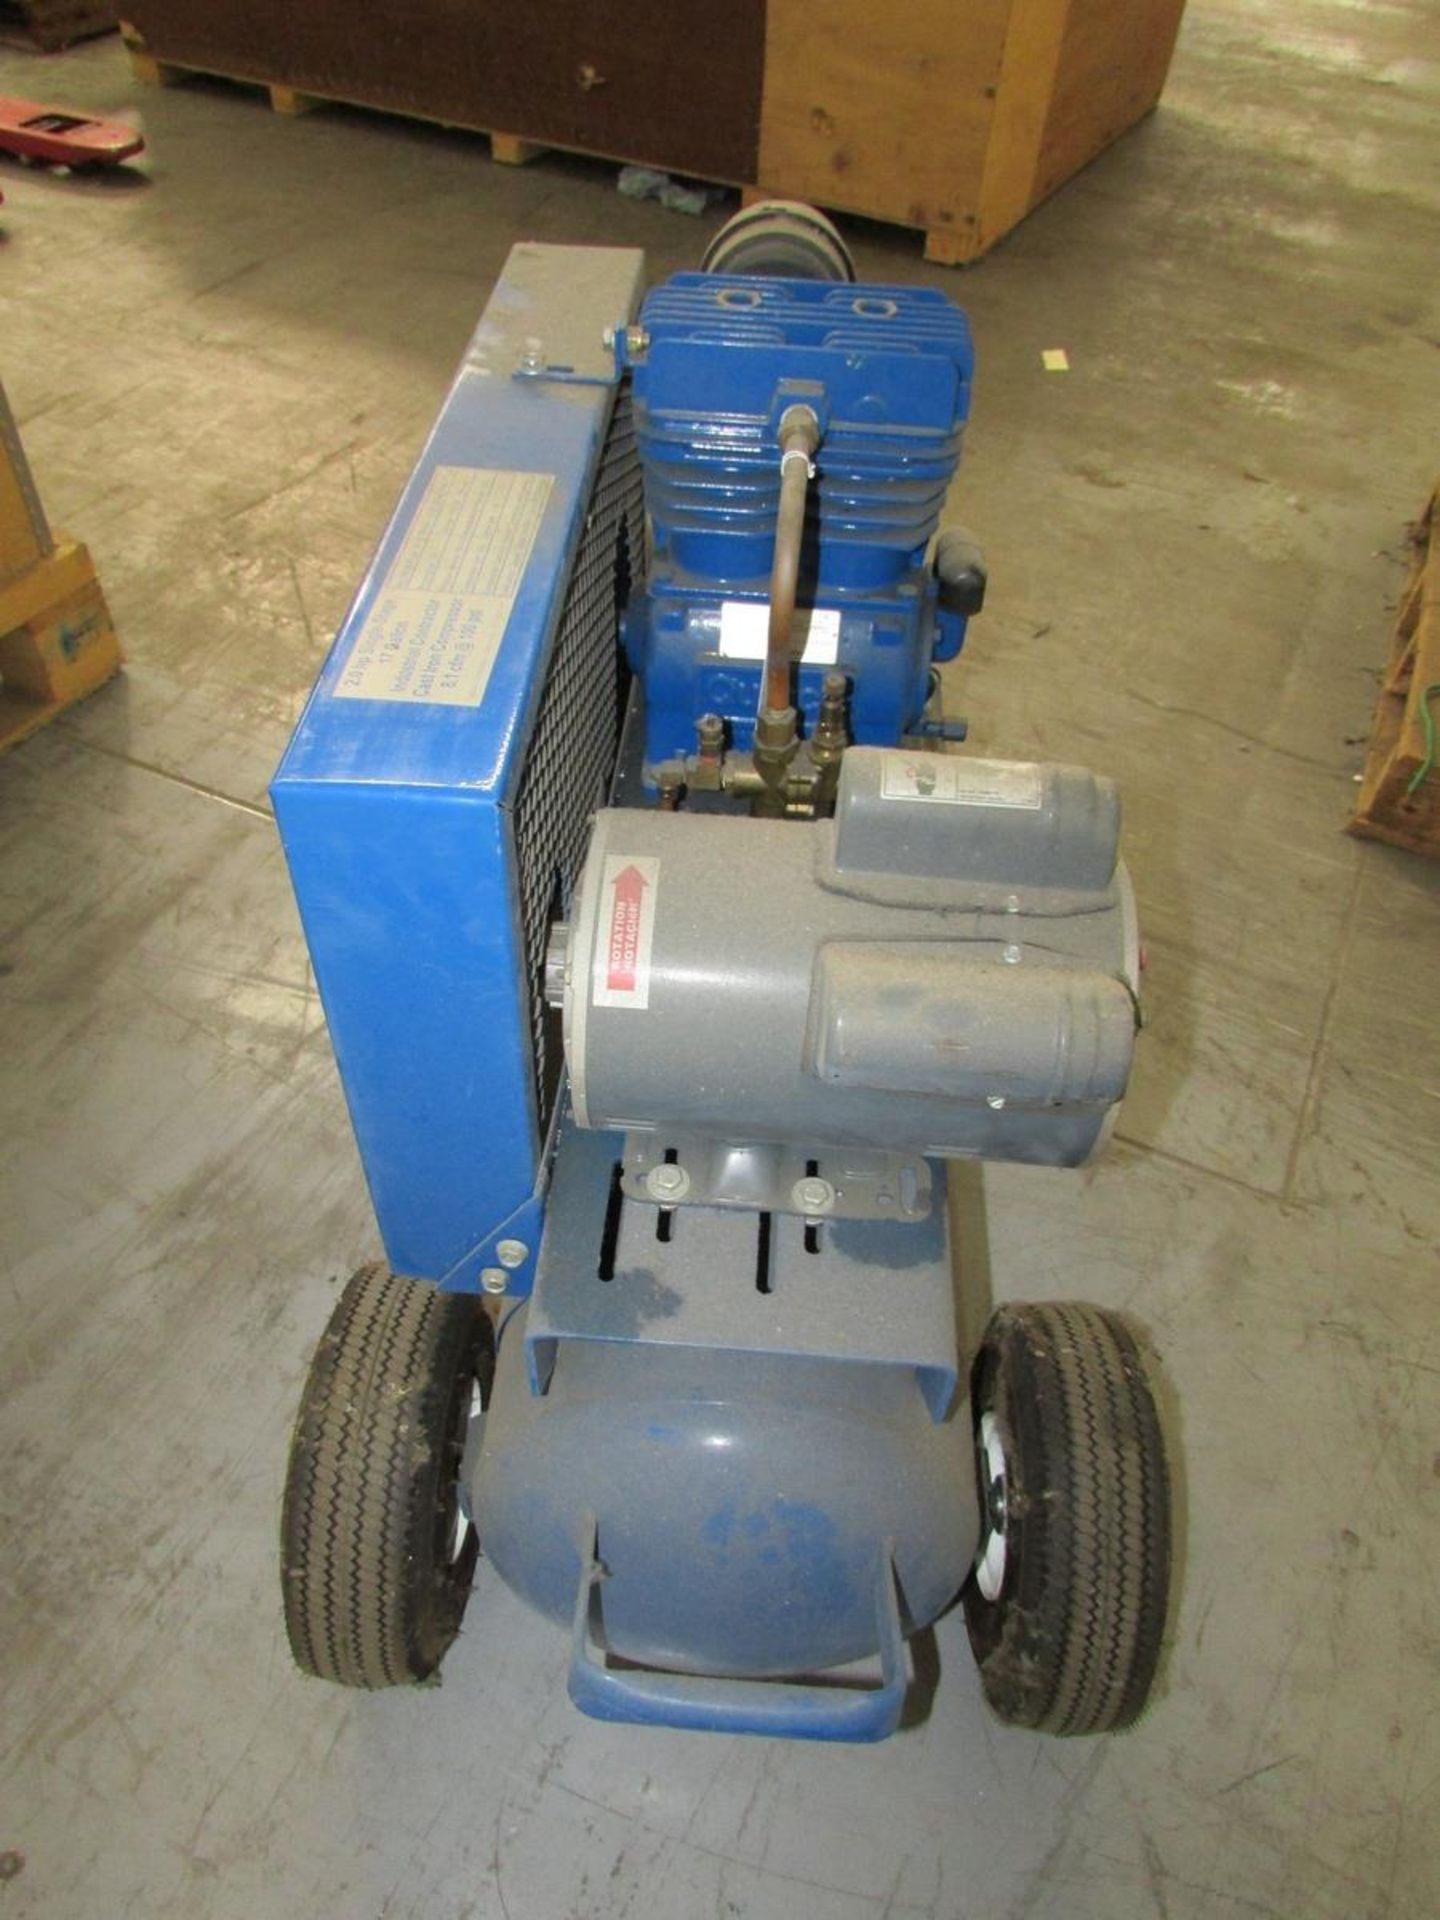 Quincy Compressor 121DC17PC3A 2HP Single Stage Portable Tank Mounted Air Compressor - Image 11 of 16